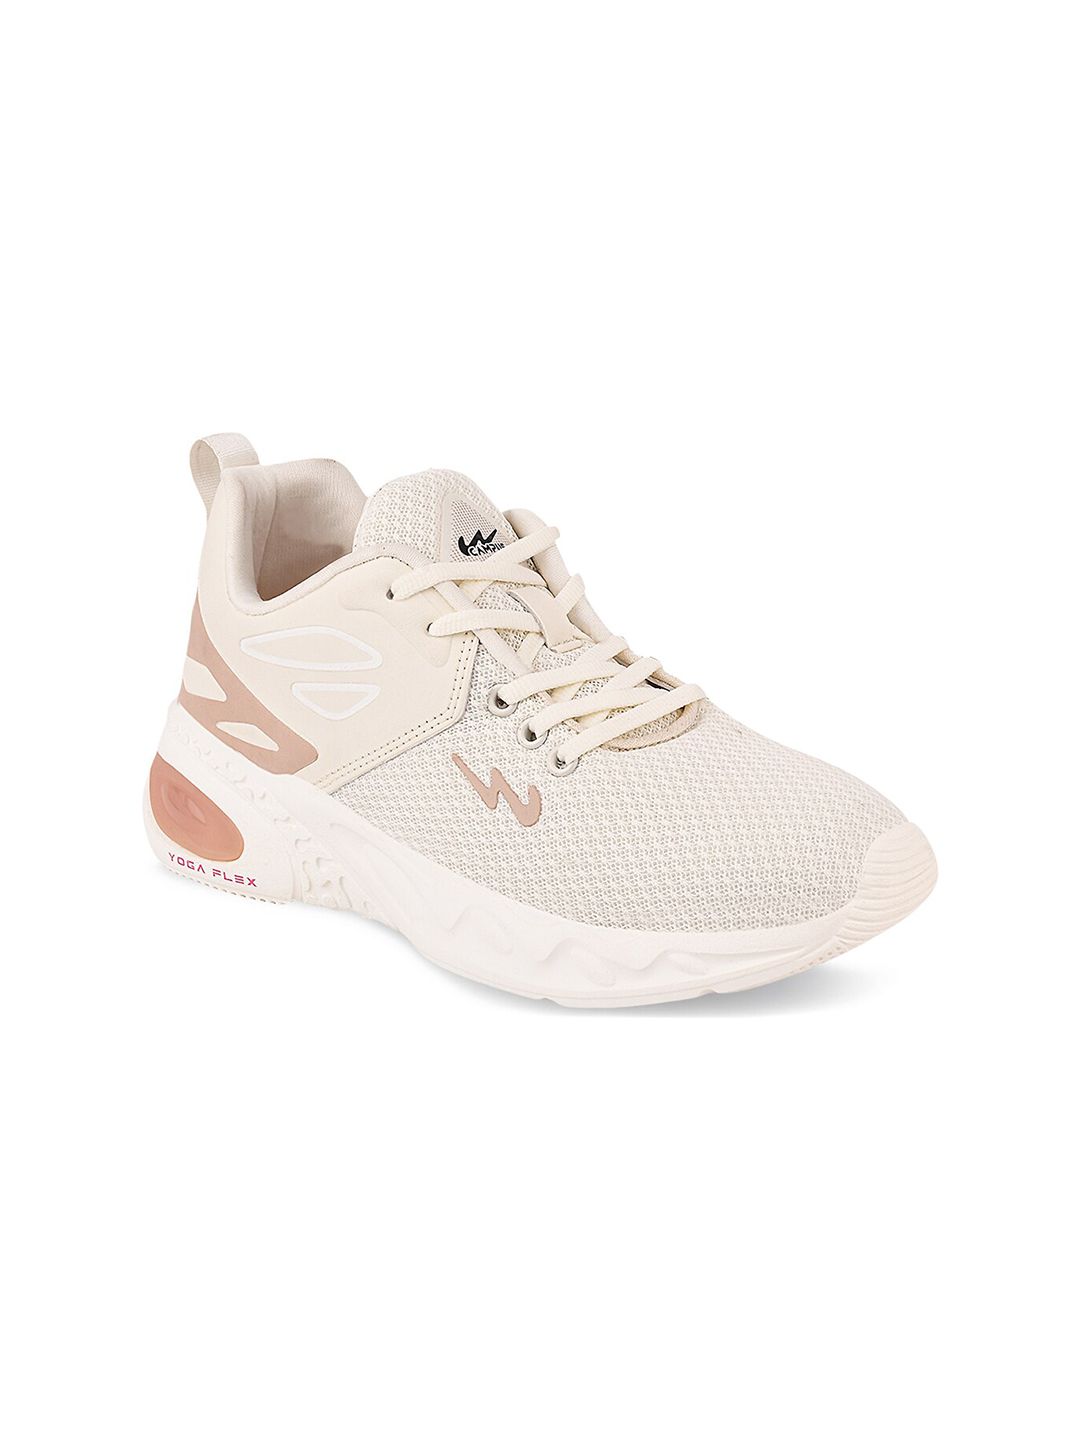 Campus Women Off White Mesh Running Shoes Price in India